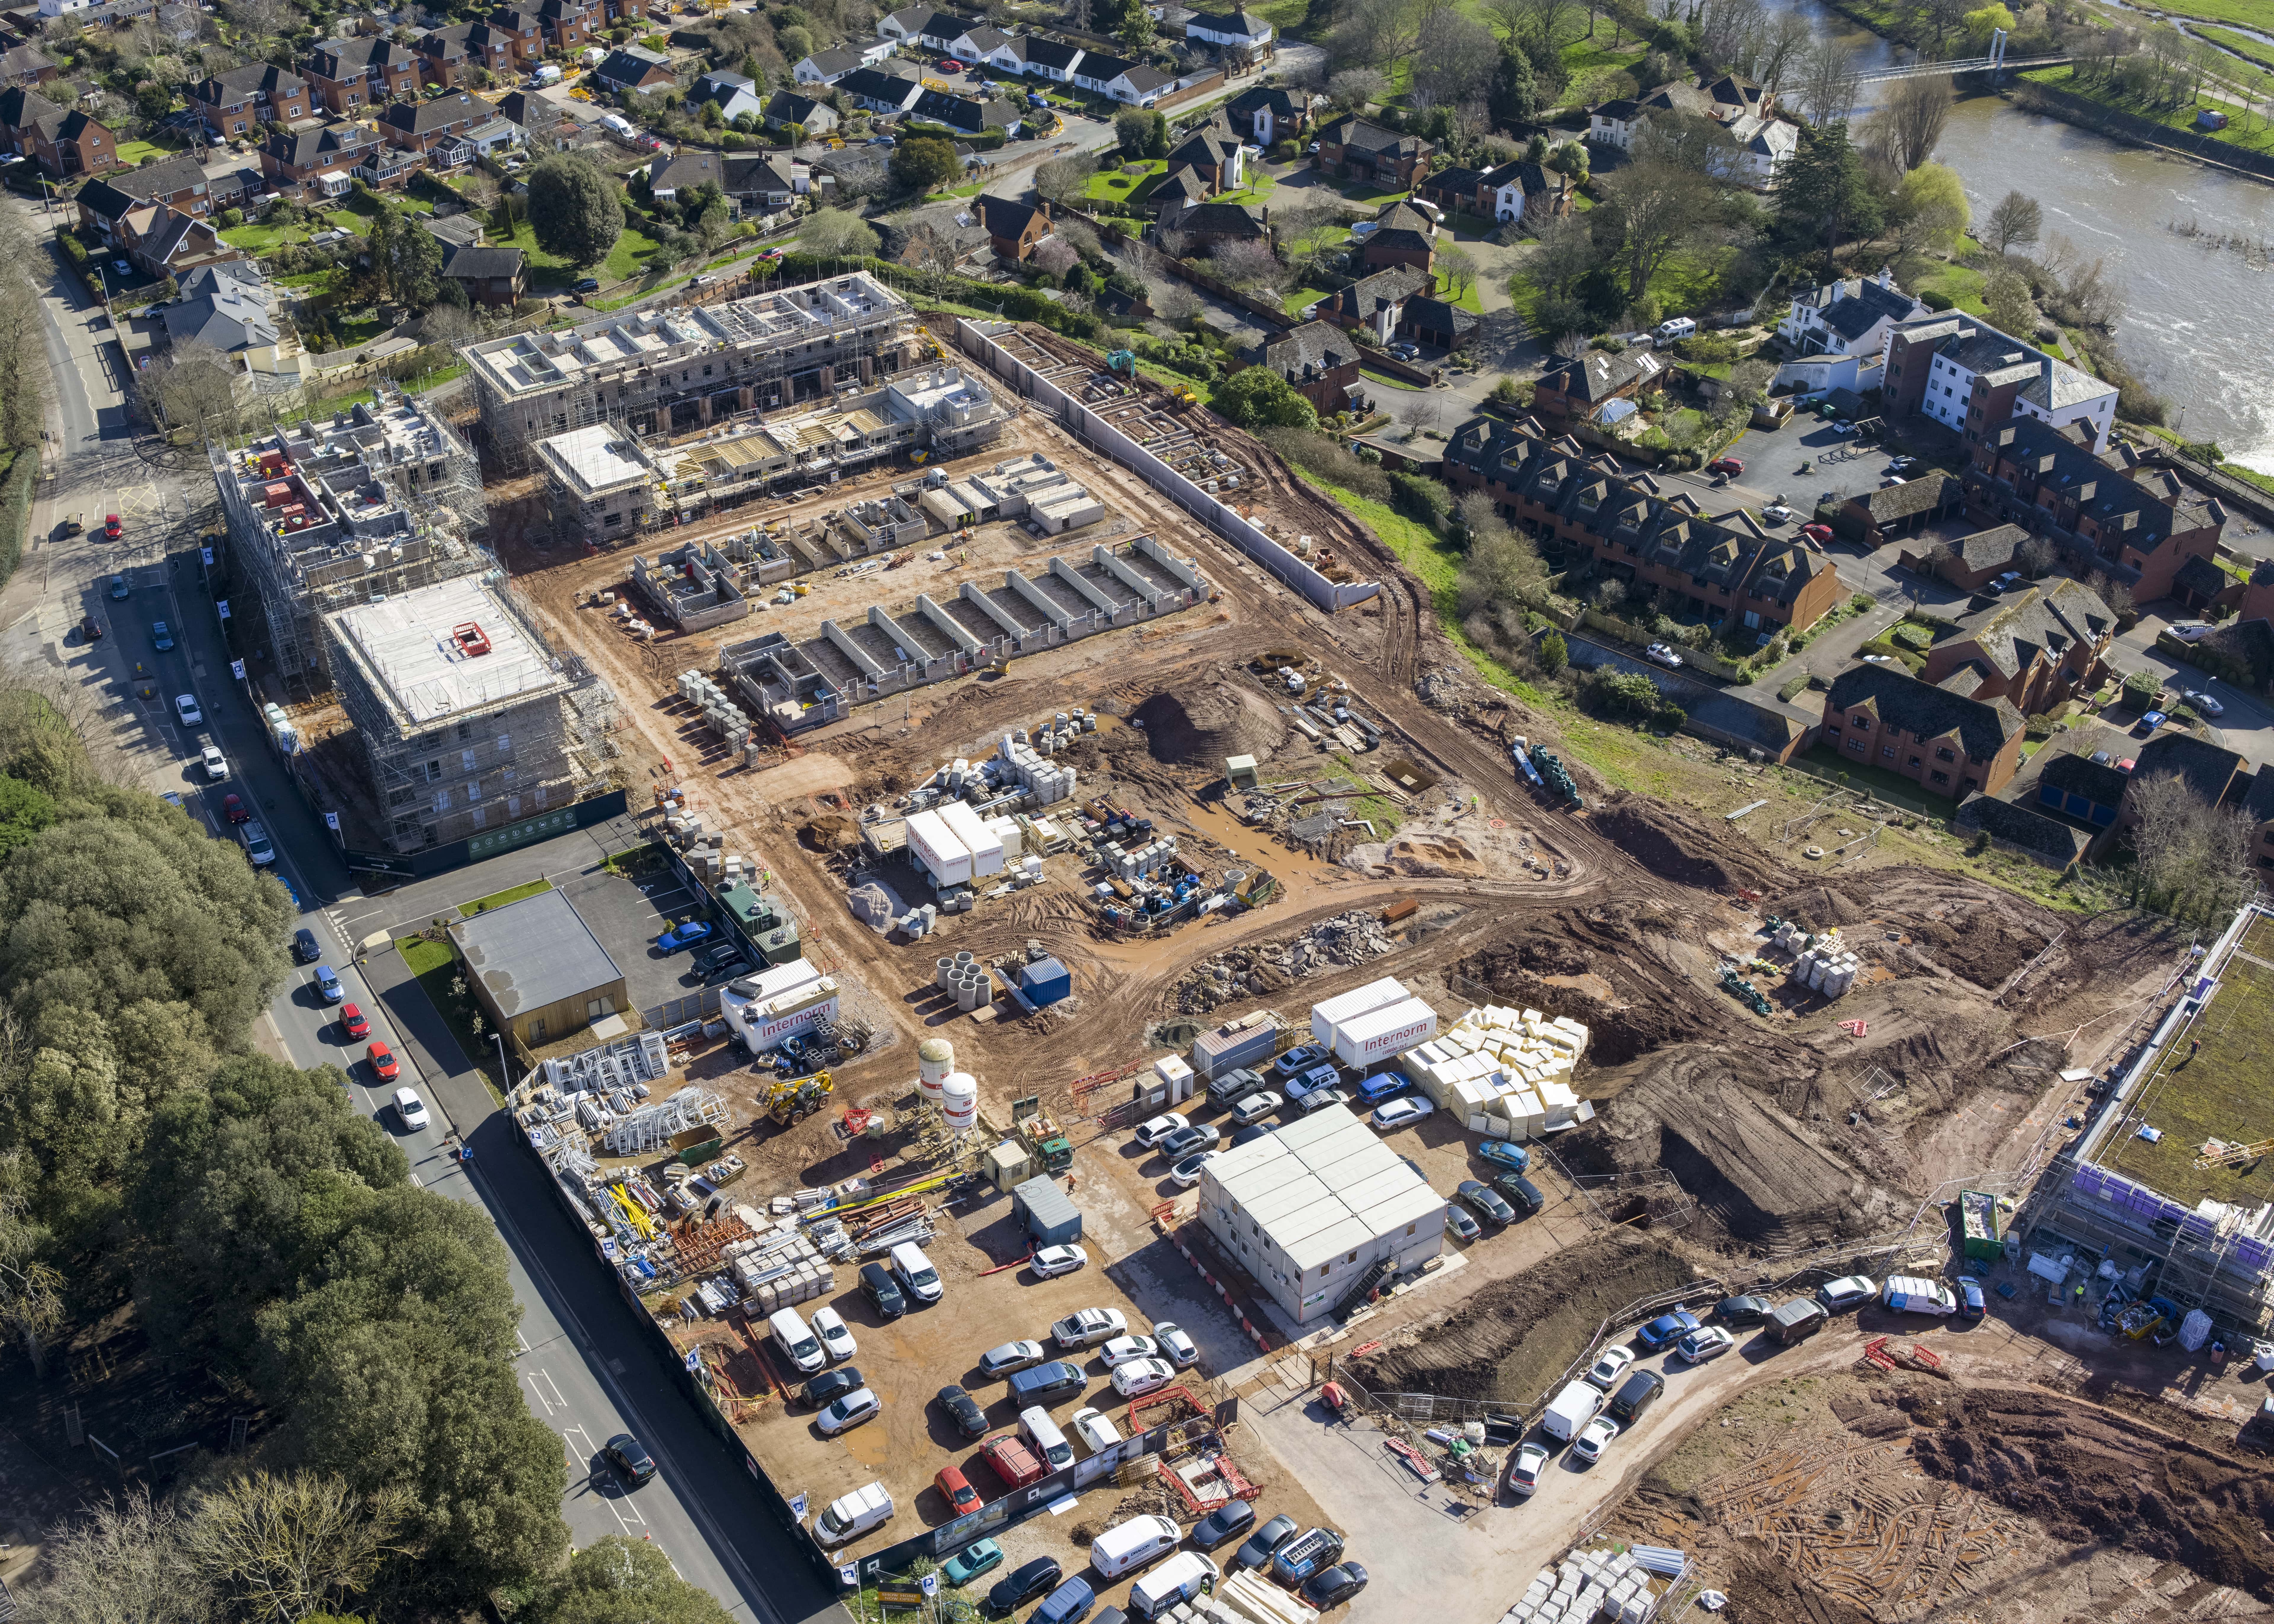 St Leonards Quarter Update - main image showing a drone photo over the site